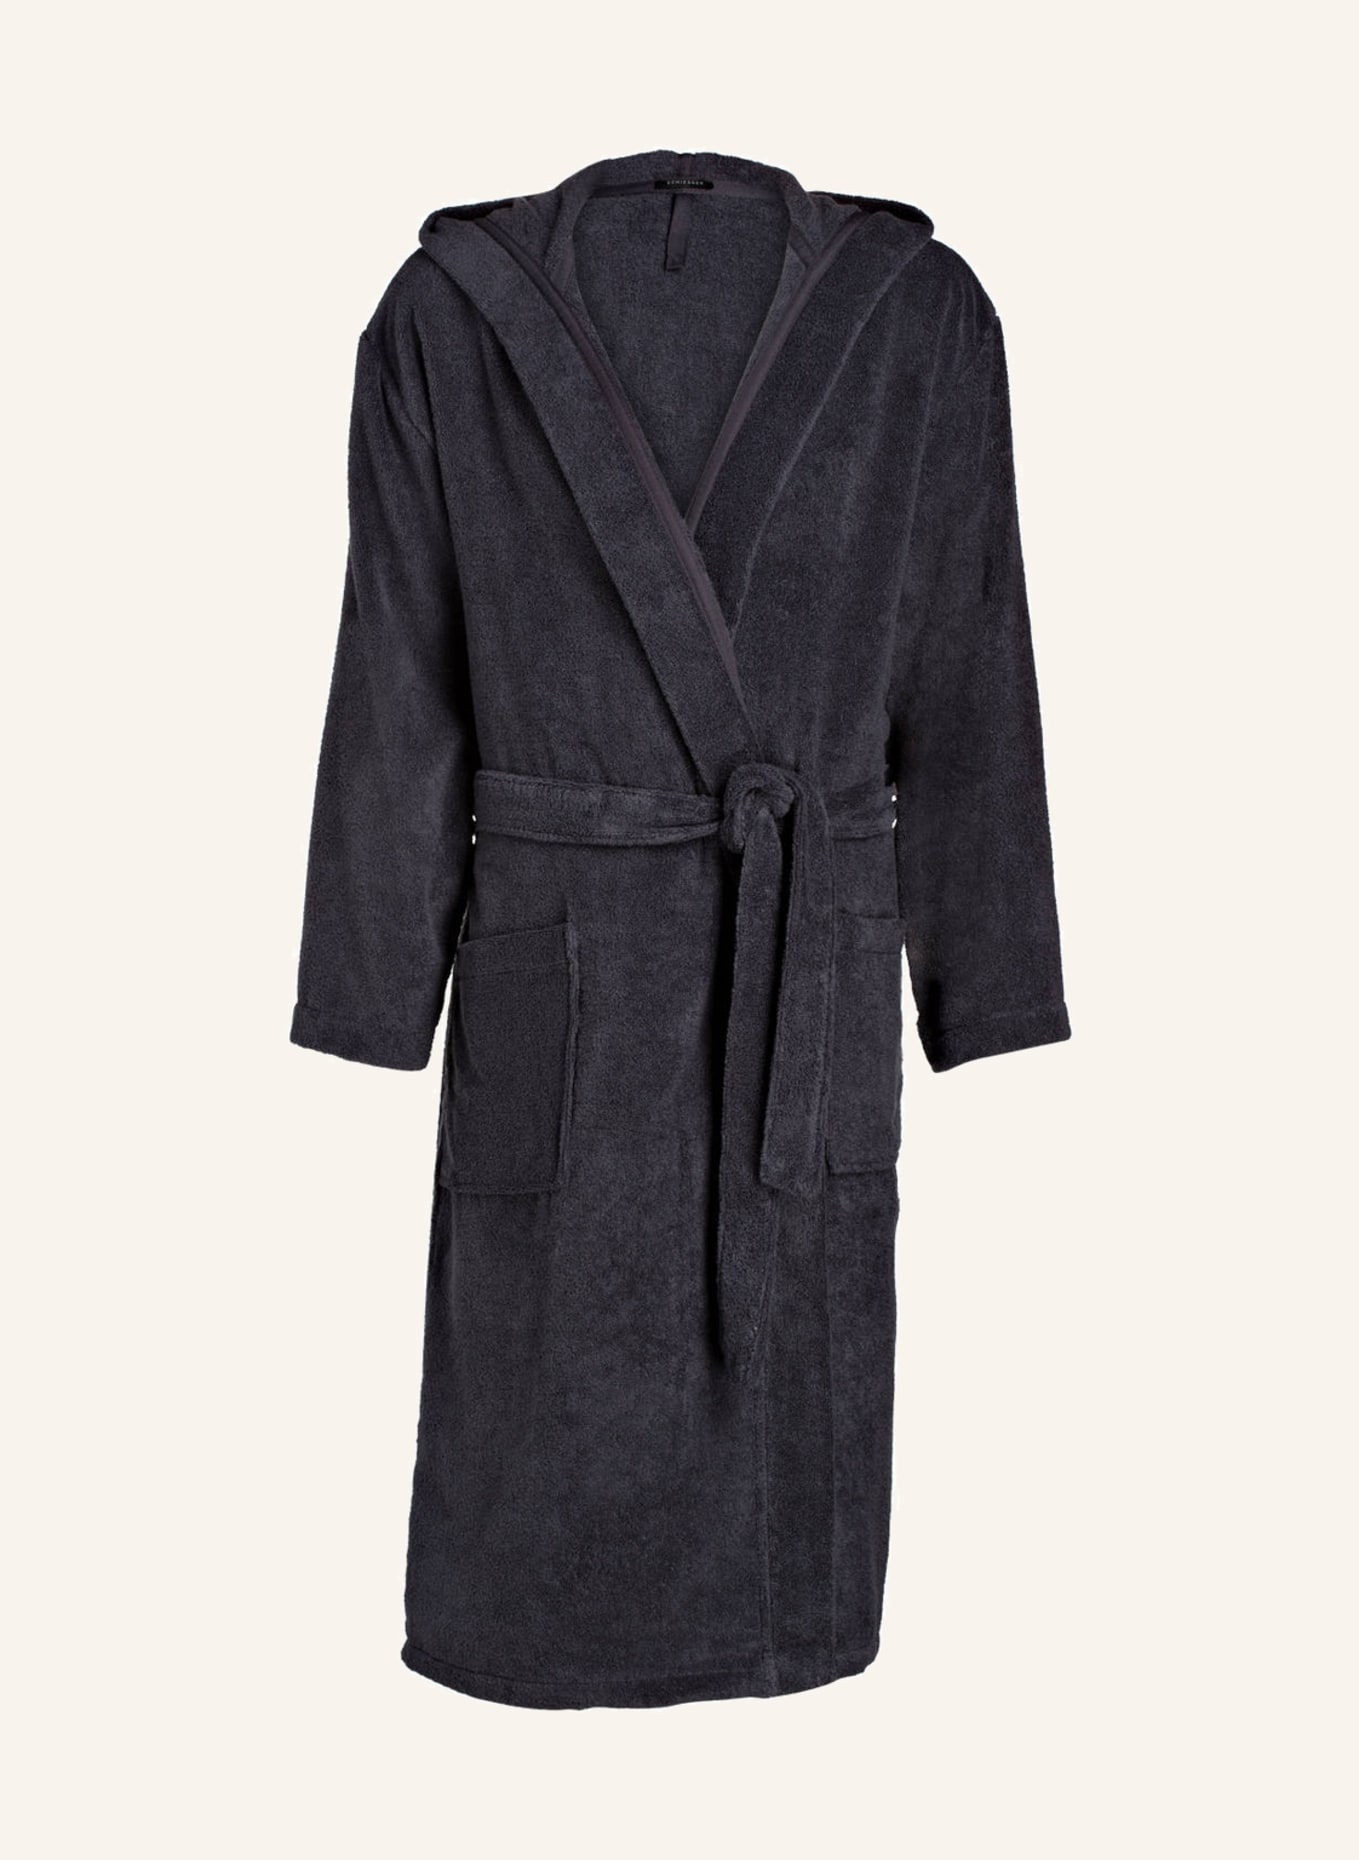 SCHIESSER Men’s bathrobe with hood, Color: ANTHRACITE (Image 1)